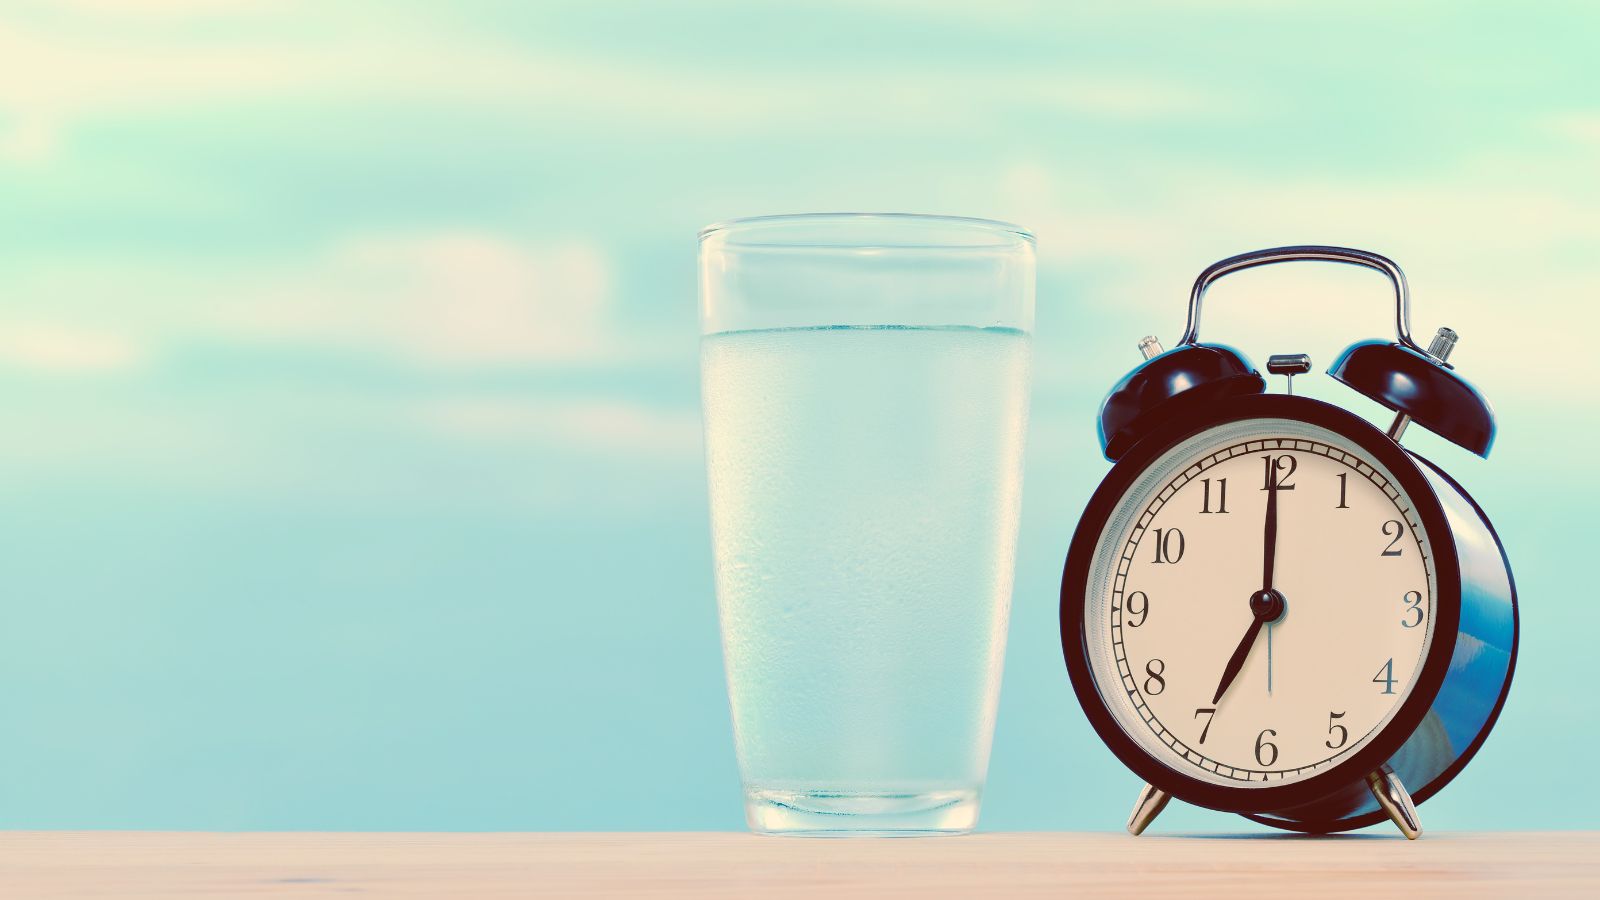 How Long Does It Take To Pee After Drinking Water?